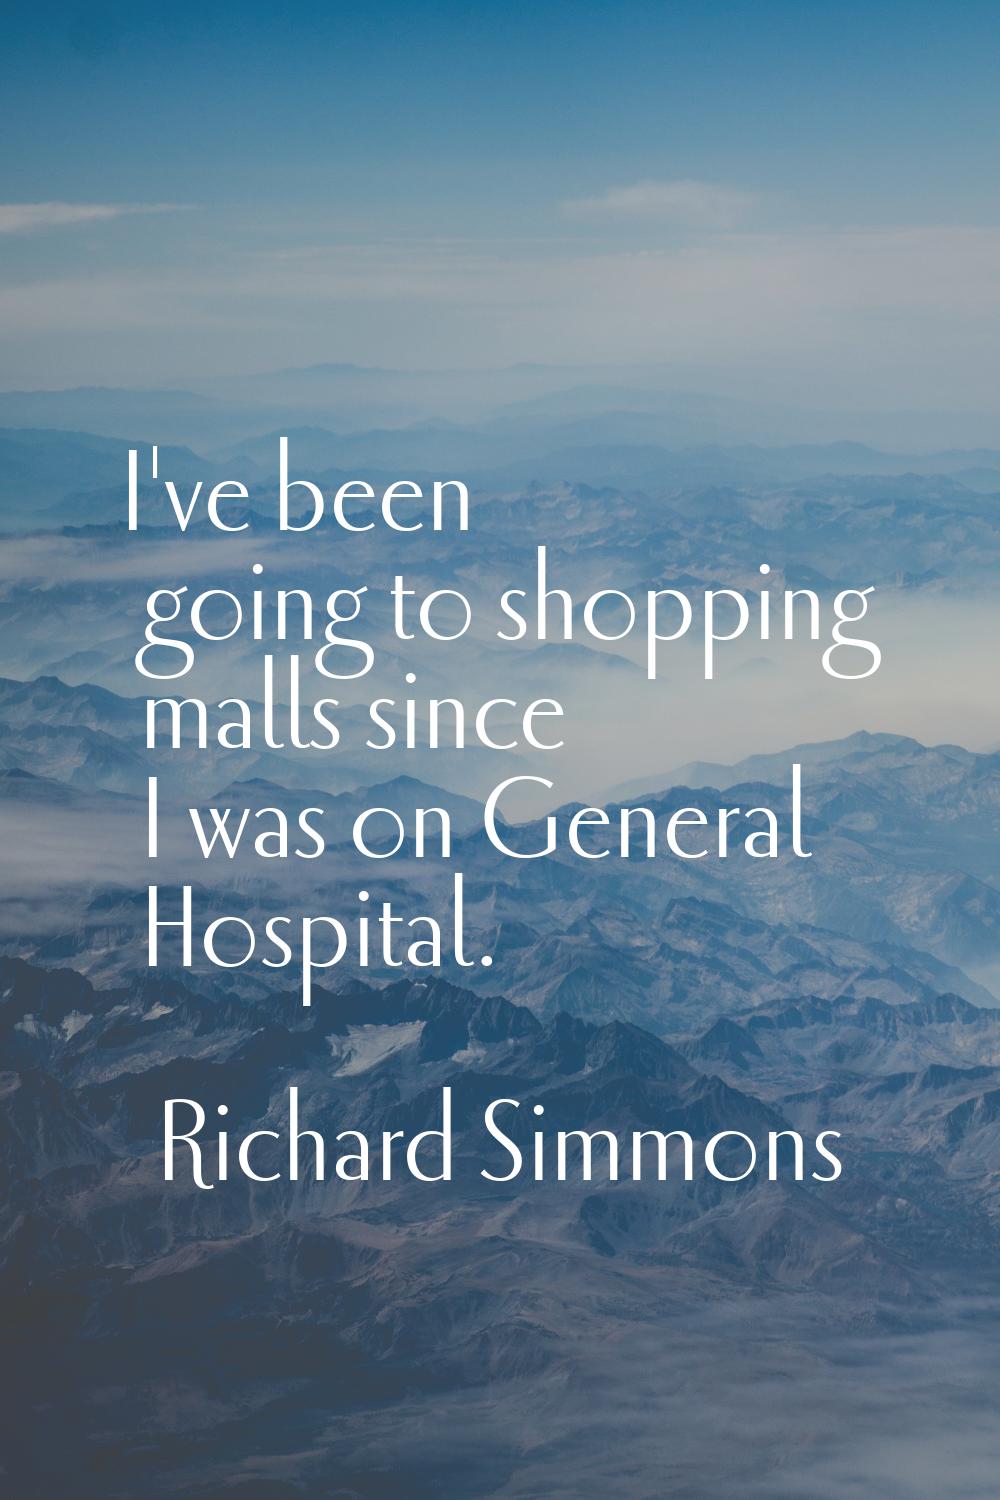 I've been going to shopping malls since I was on General Hospital.